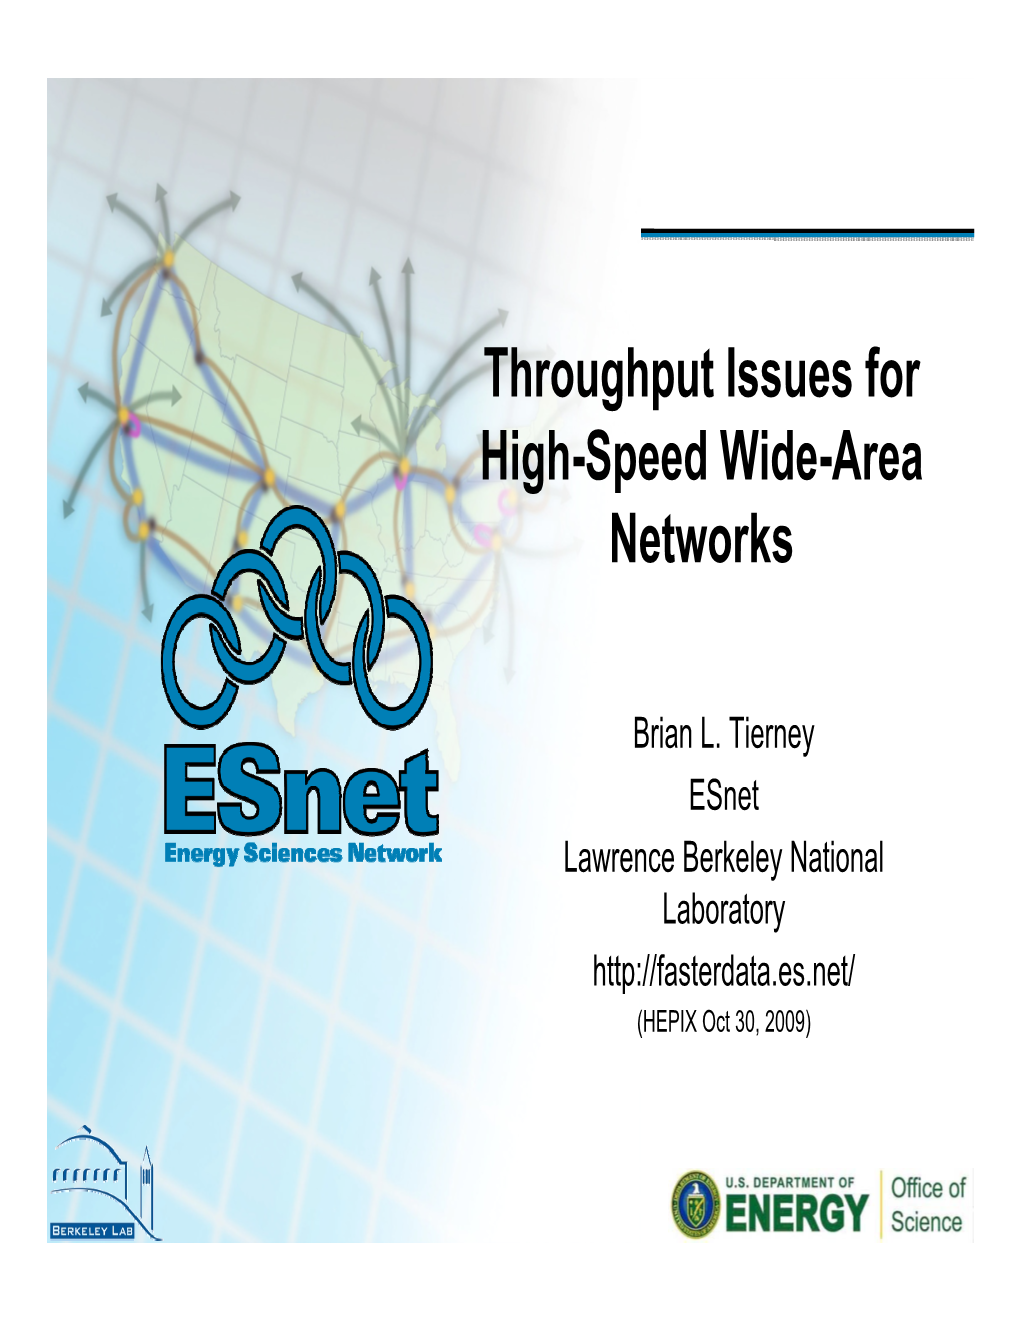 Throughput Issues for High-Speed Wide-Area Networks